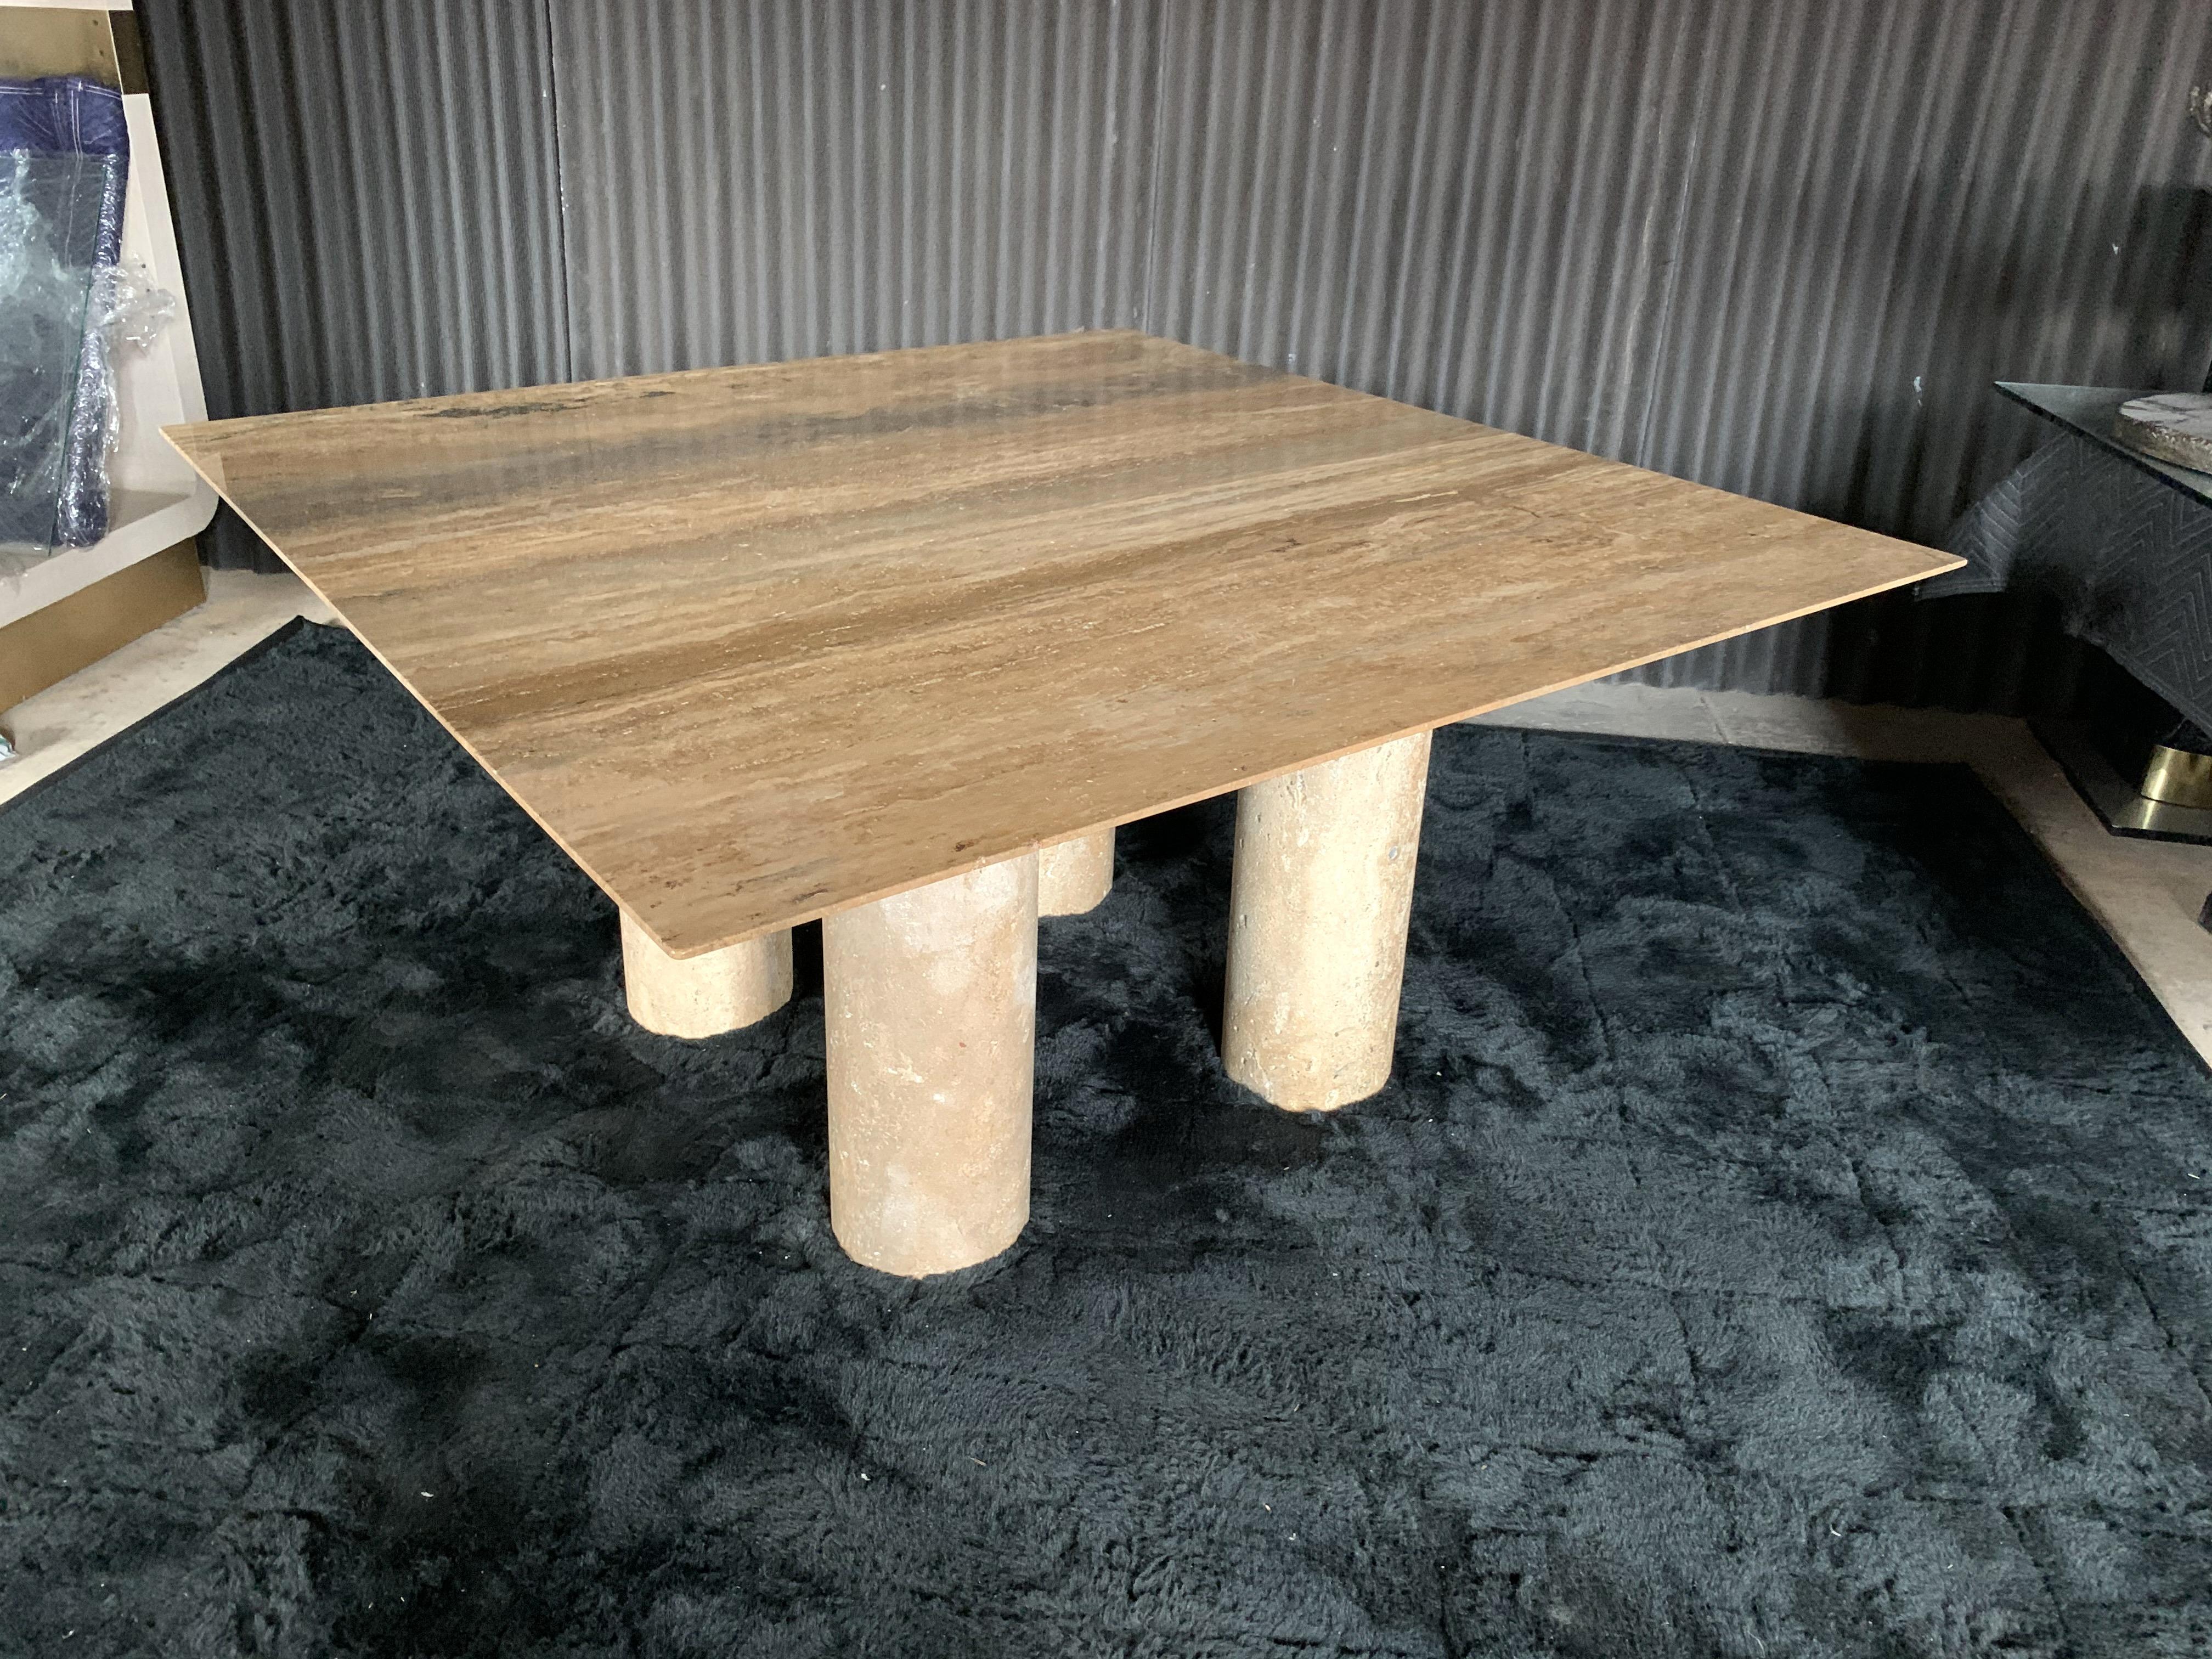 Gorgeous and monumental polished travertine top dining table with 4 massive unpolished unfilled stone column bases, in the style of Mario Bellini.
This table was built to impress and is in stunning condition.
No chips or breaks anywhere. Polished